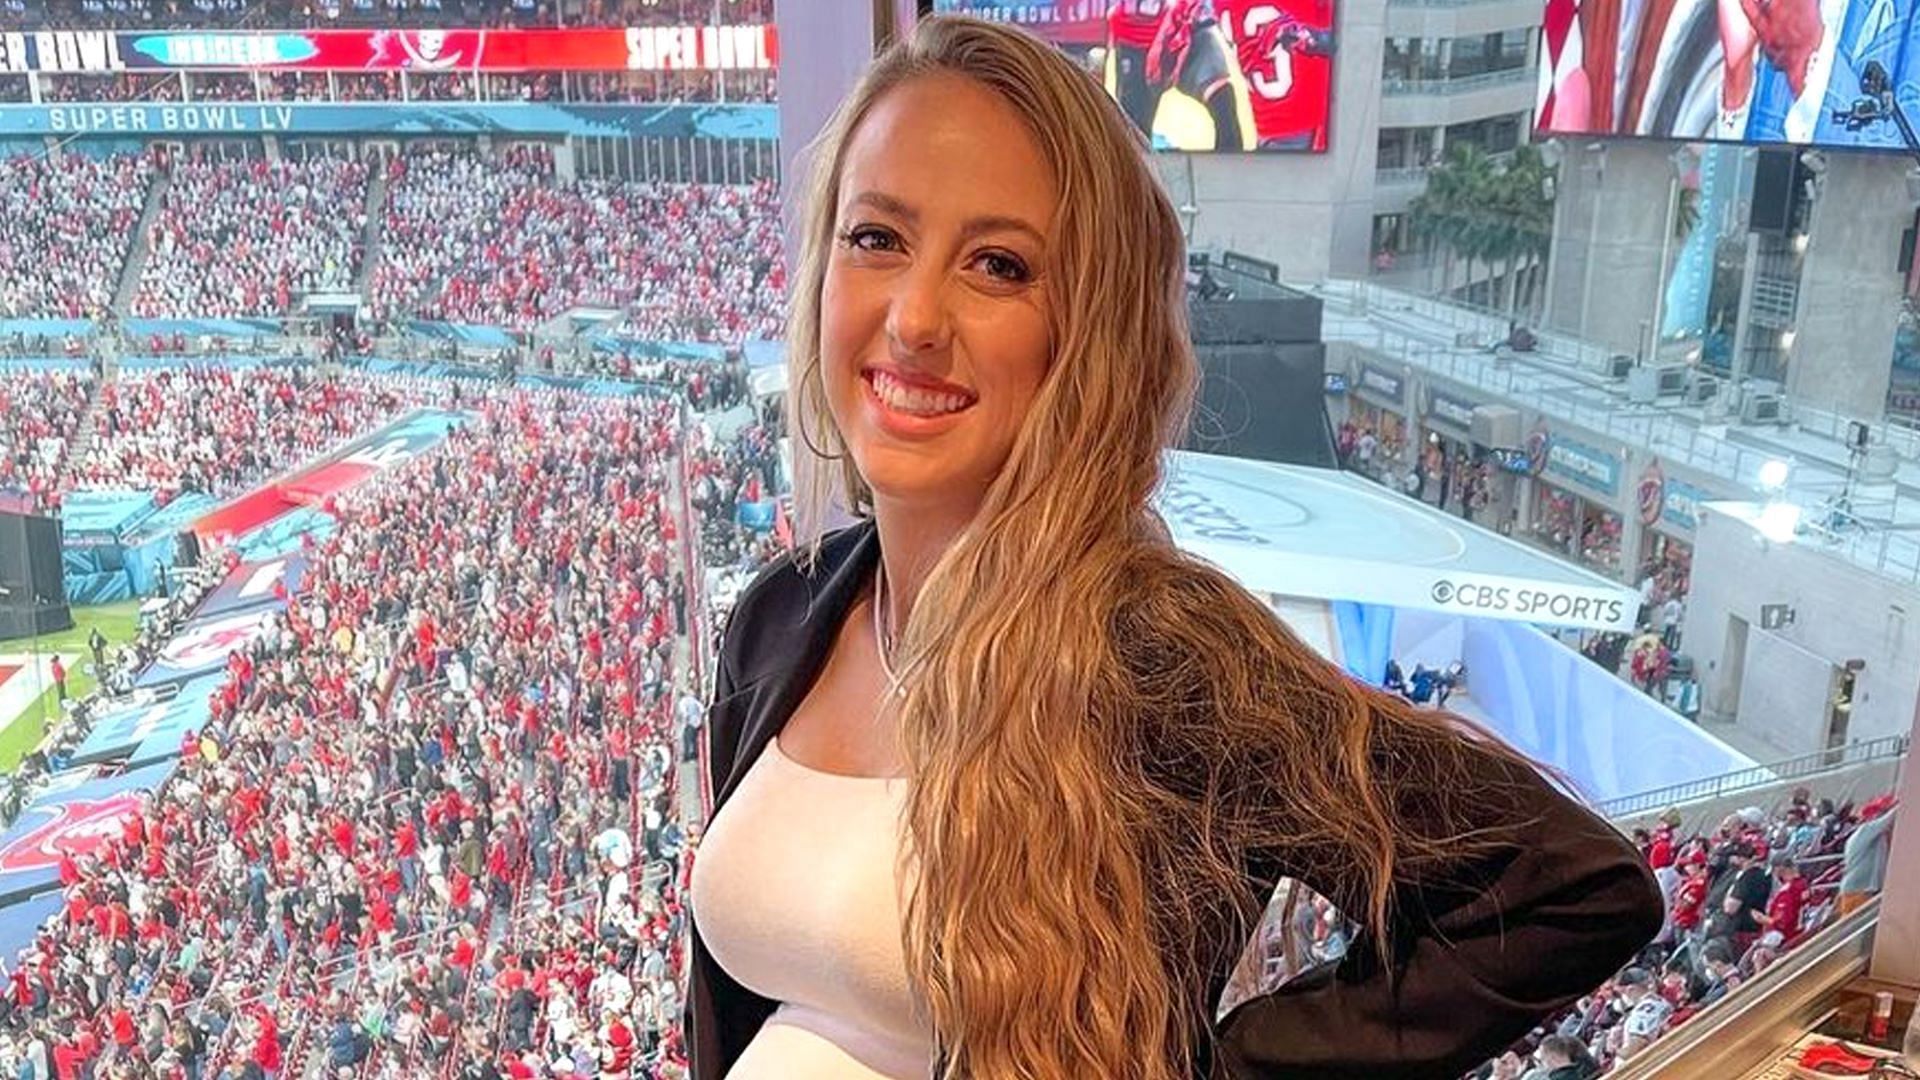 Brittany Mahomes attending a Kansas City Chiefs game